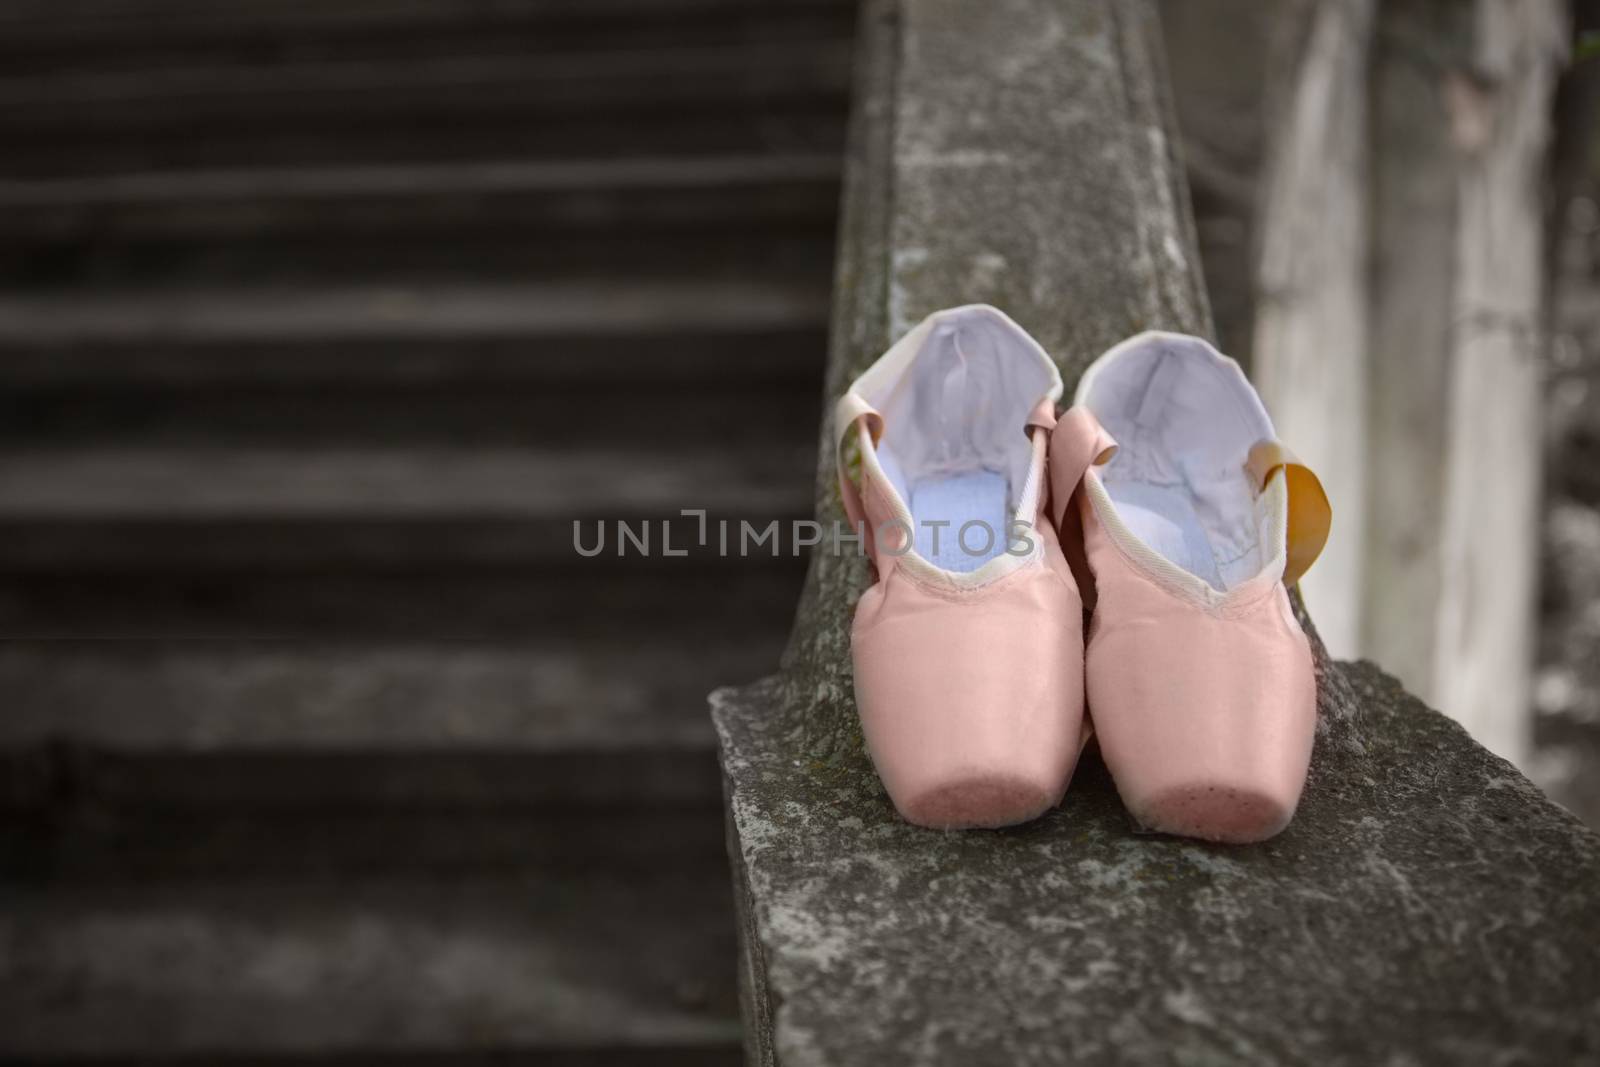 Pointe shoes for a classical ballerina, close-up on concrete by sermax55